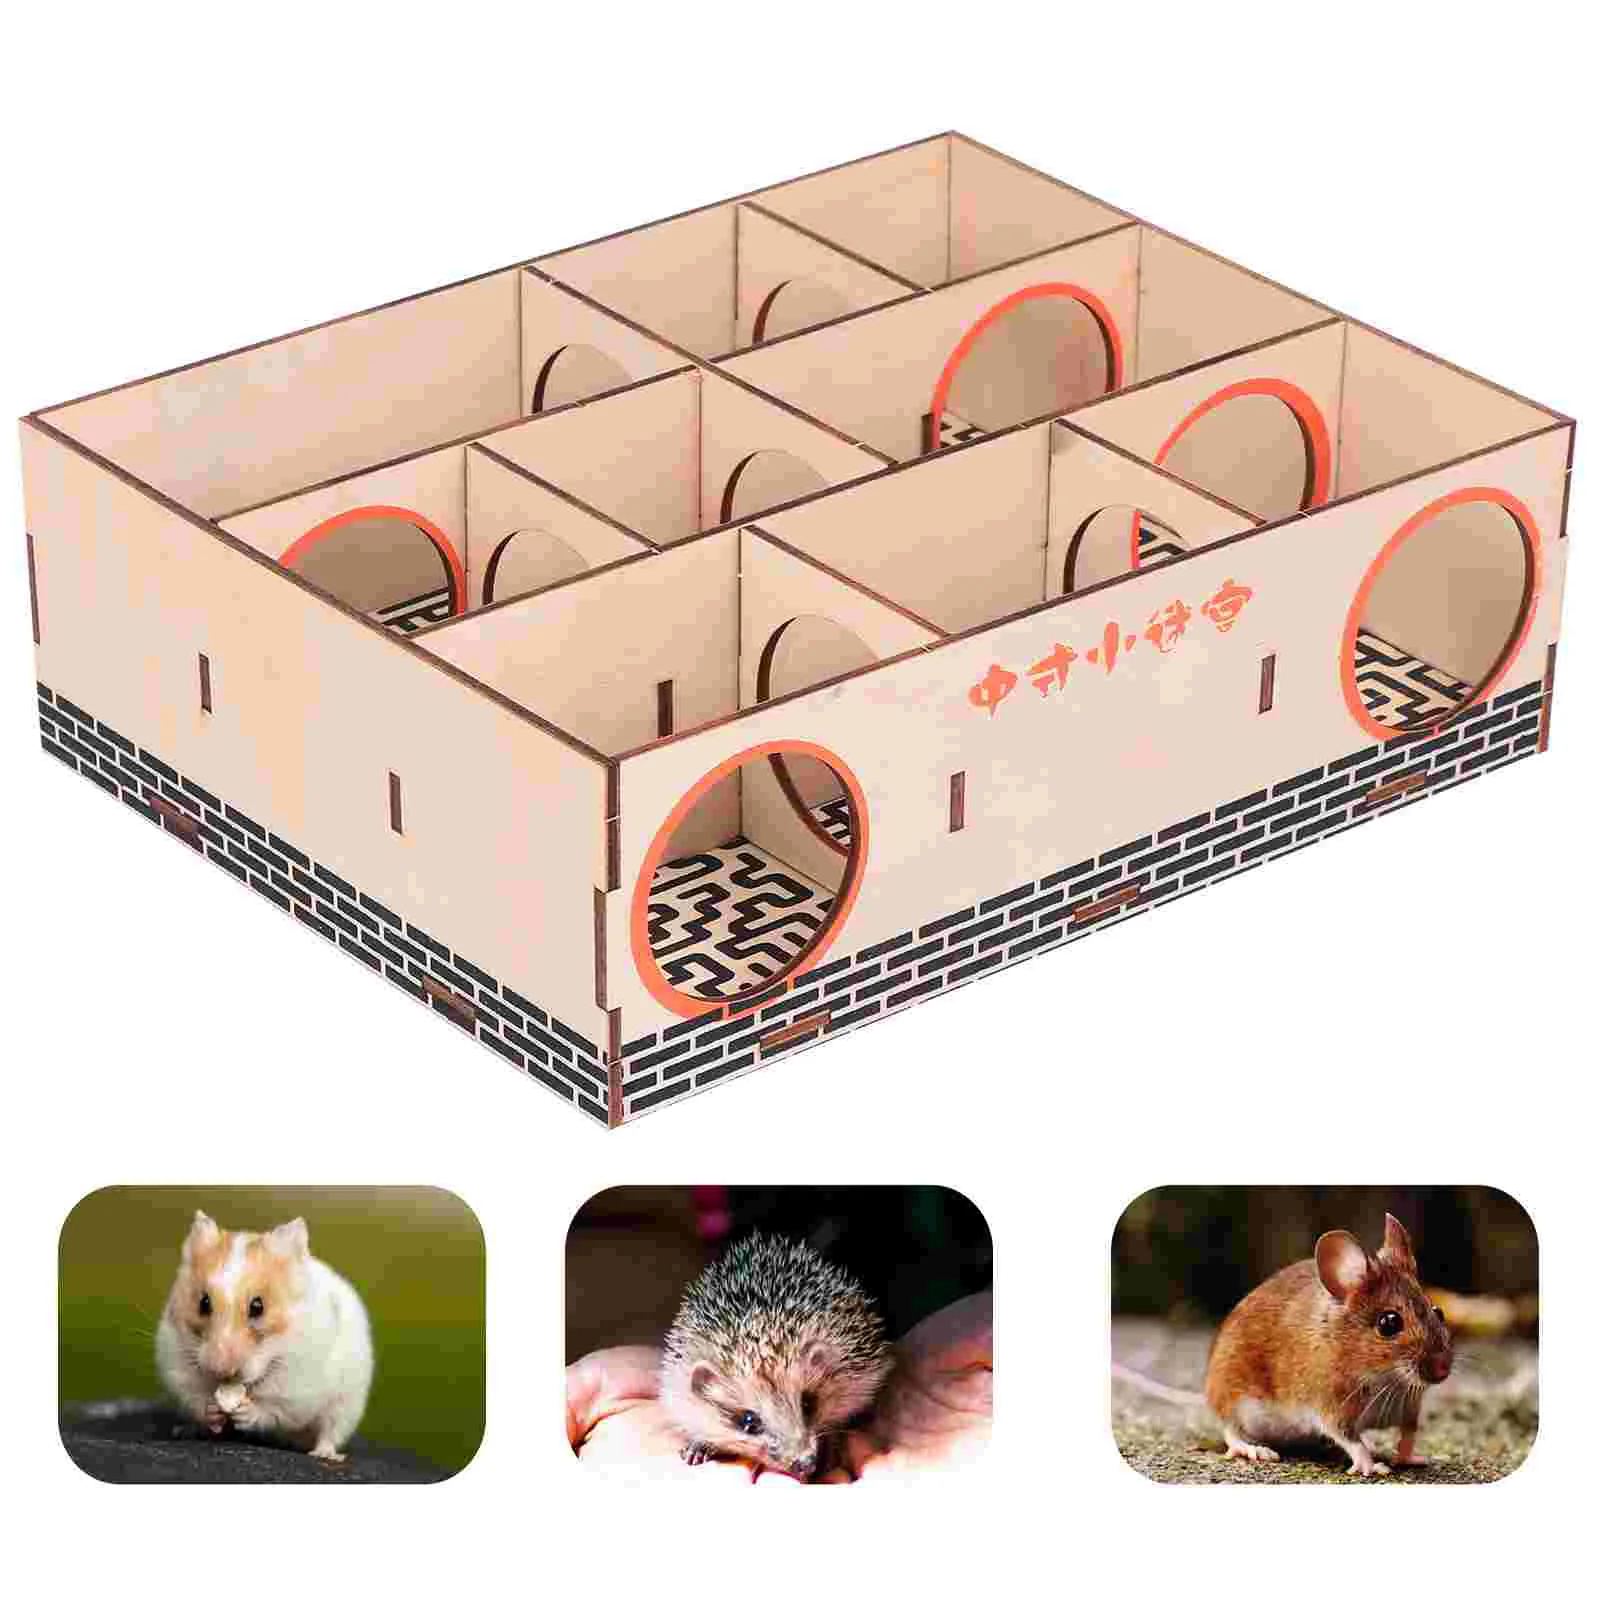 

Wooden Maze Tunnel for Small Dwarf Hamster Gerbil Rat Small Activity Play Hamster House Small Cage